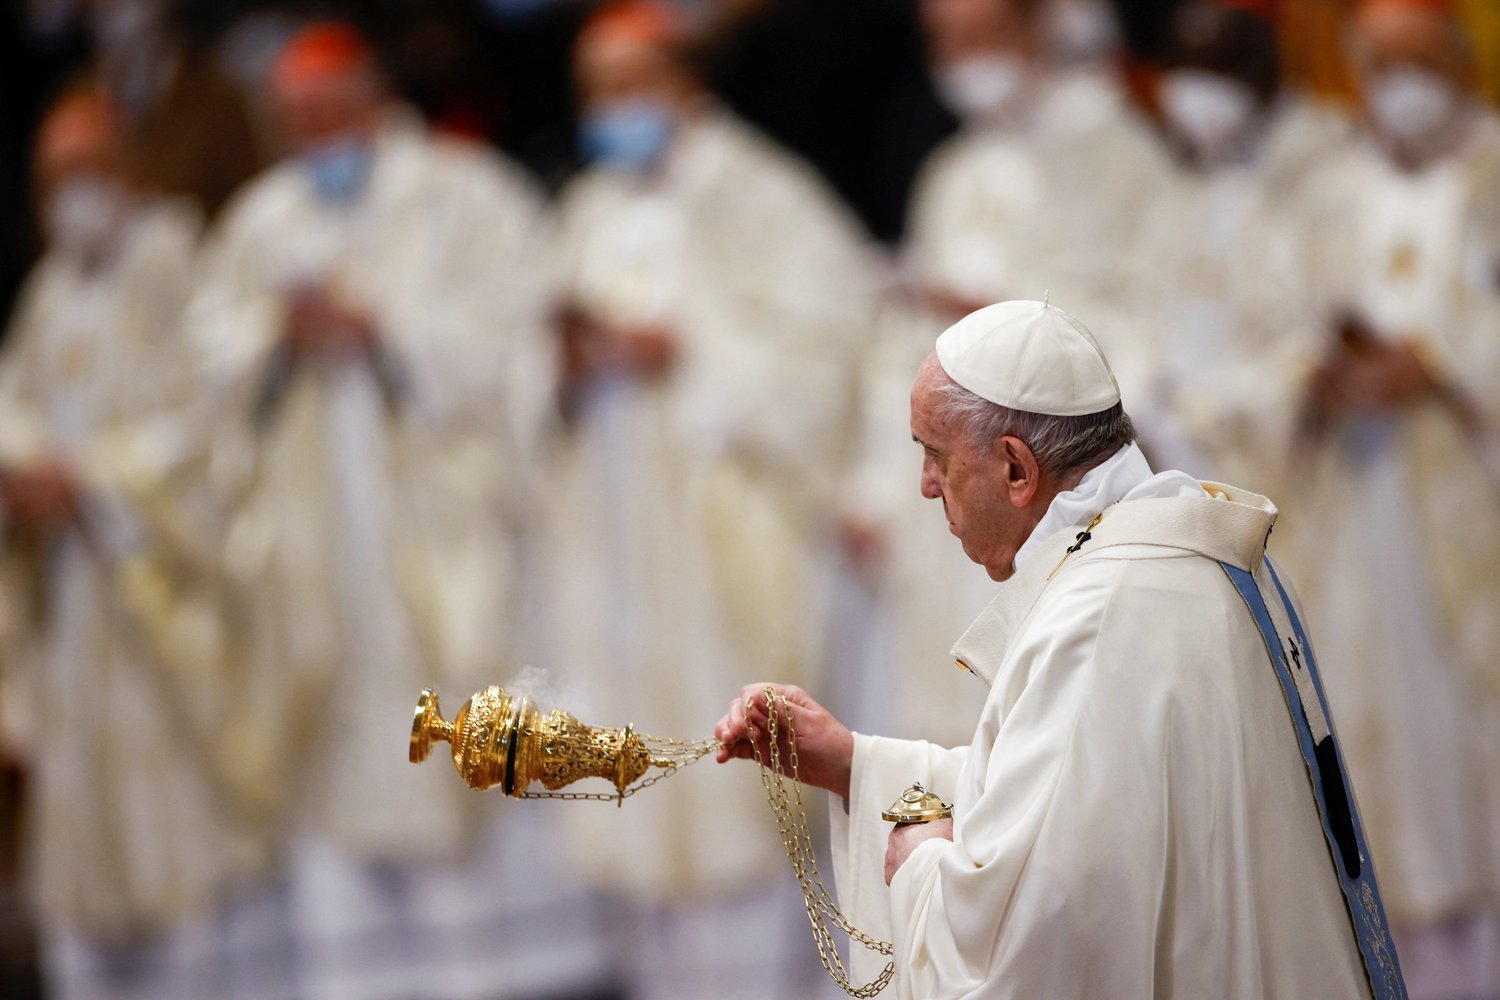 Pope Francis burns incense as he celebrates Mass marking the feast of Mary, Mother of God, in St. Peter’s Basilica at the Vatican Jan. 1.